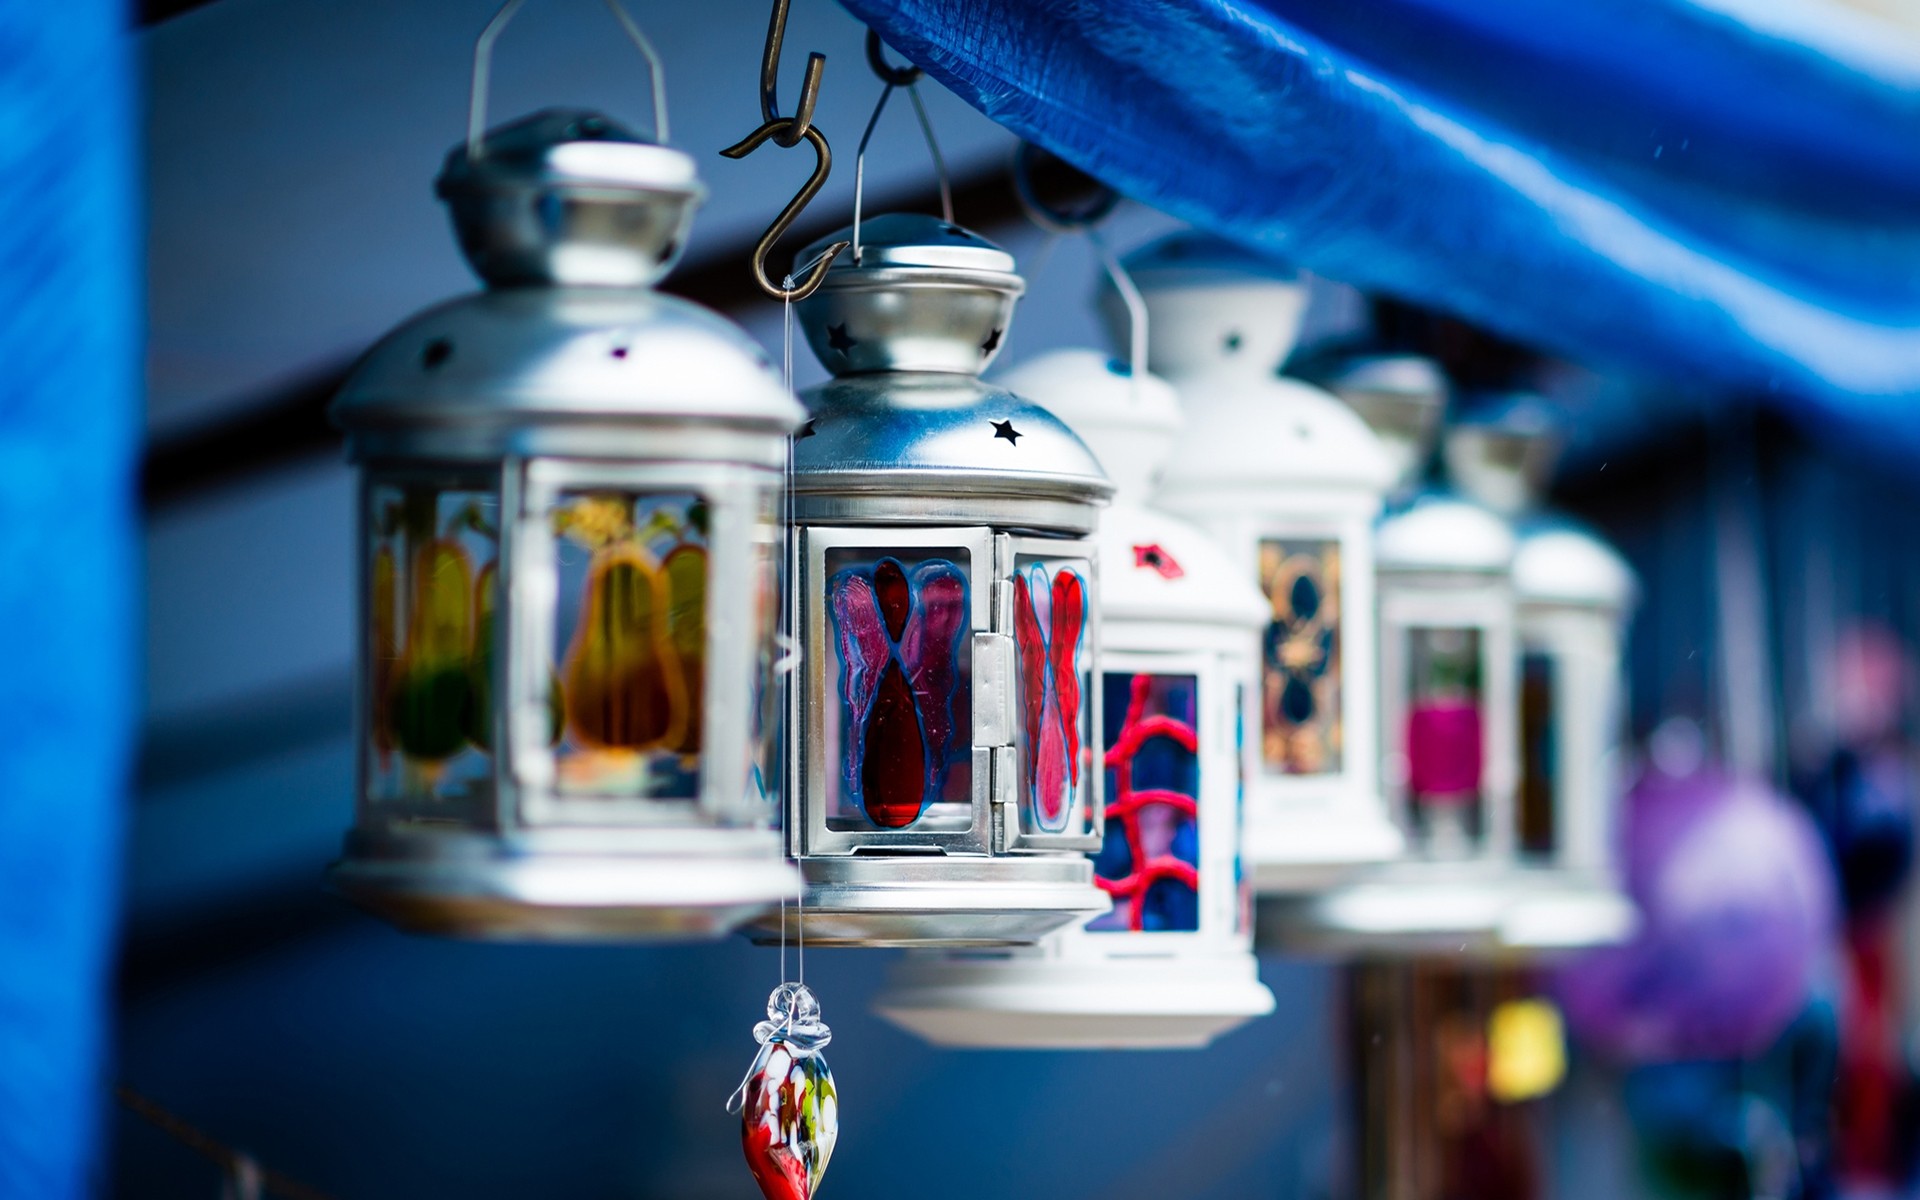 Lantern Decorations Stained Glass Lamp Macro Blue Flames Blurred Photography Depth Of Field 1920x1200